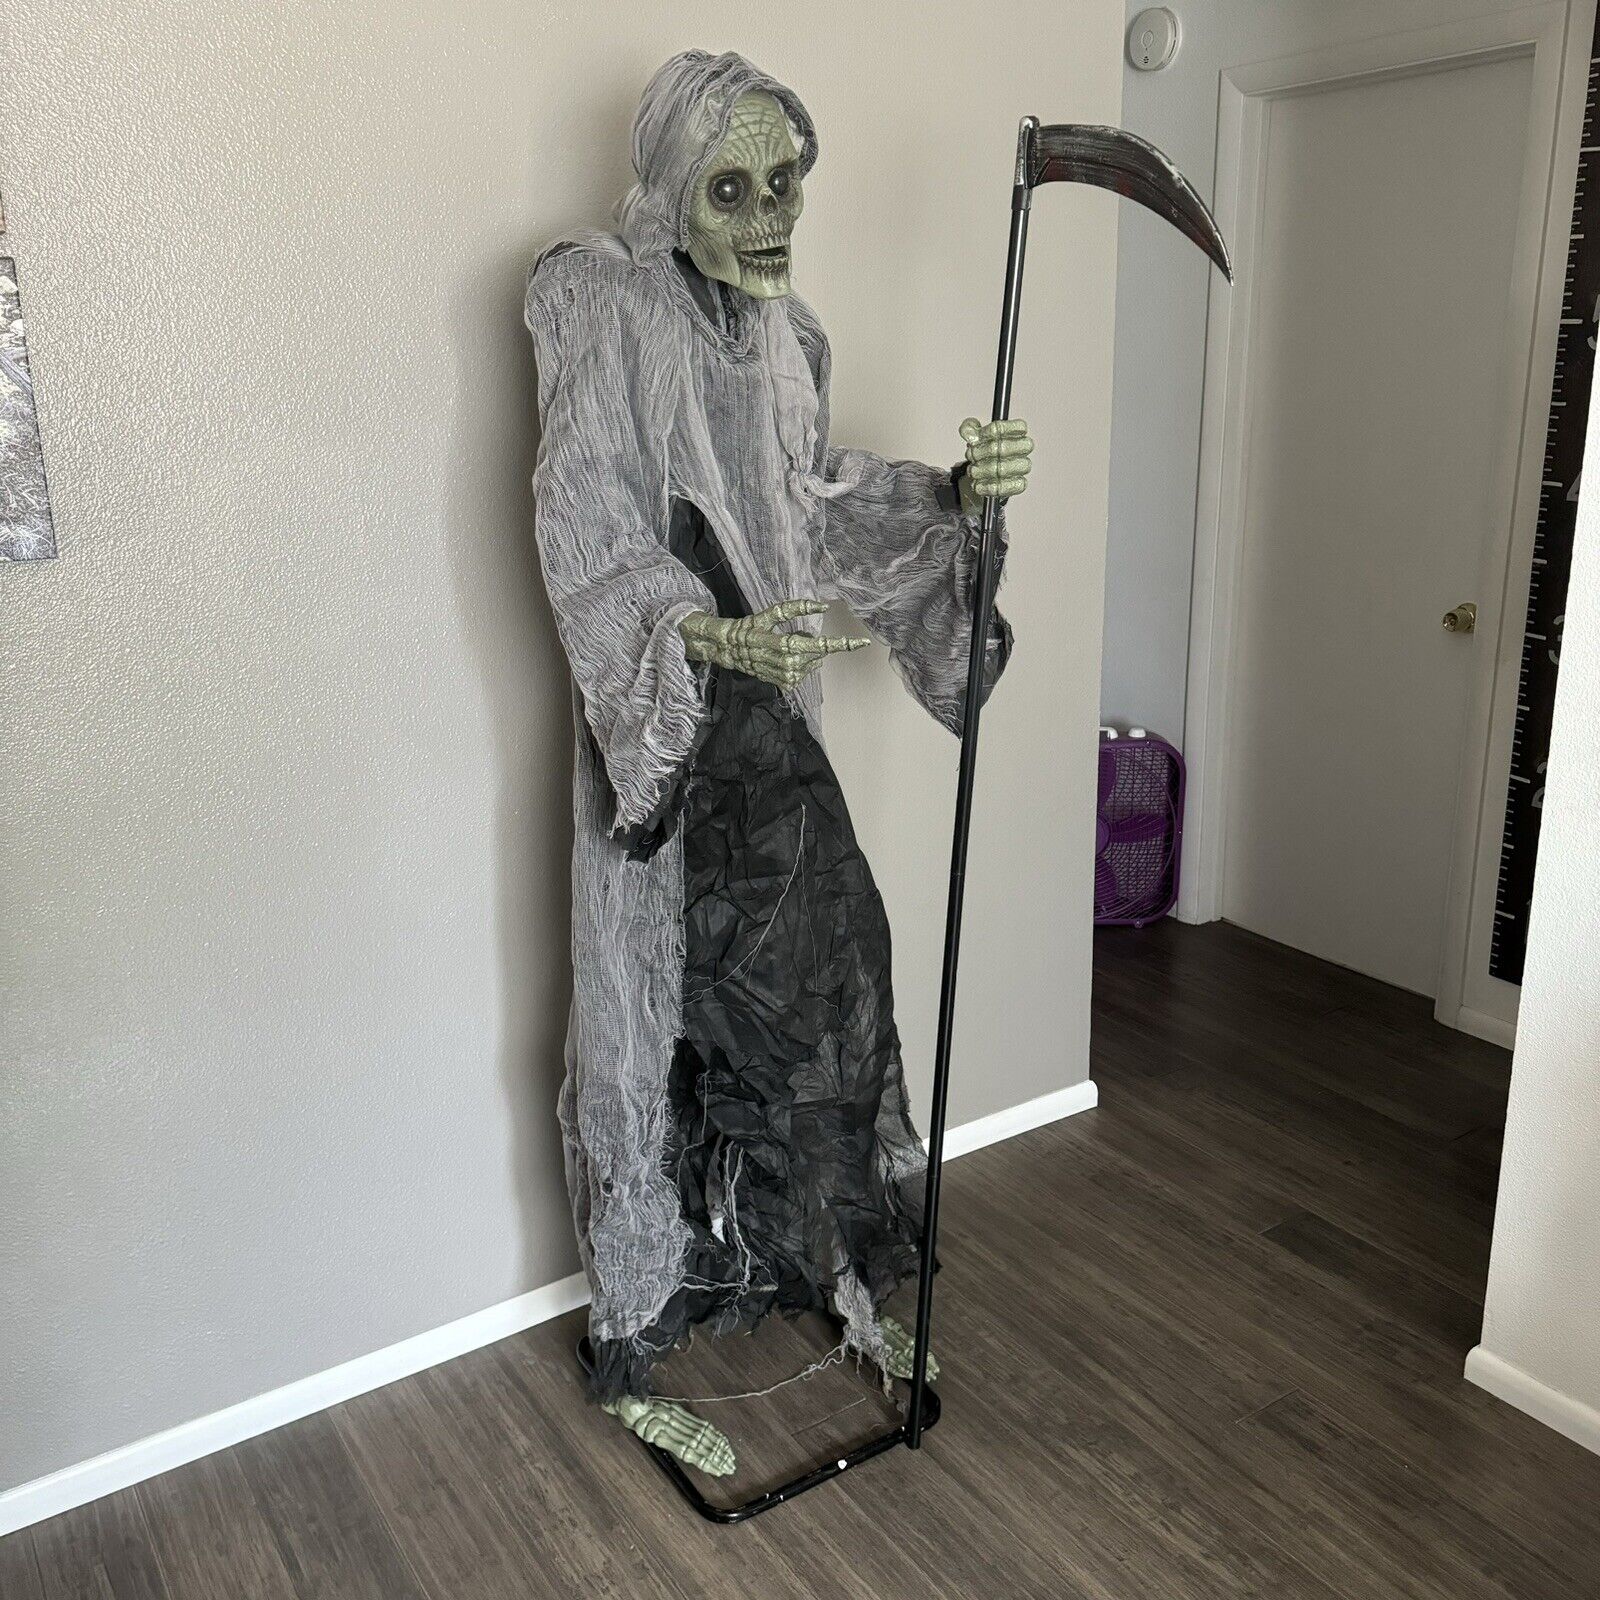 Grim Reaper Animated Talking Spooky Village Halloween Haunted House 6ft Decor